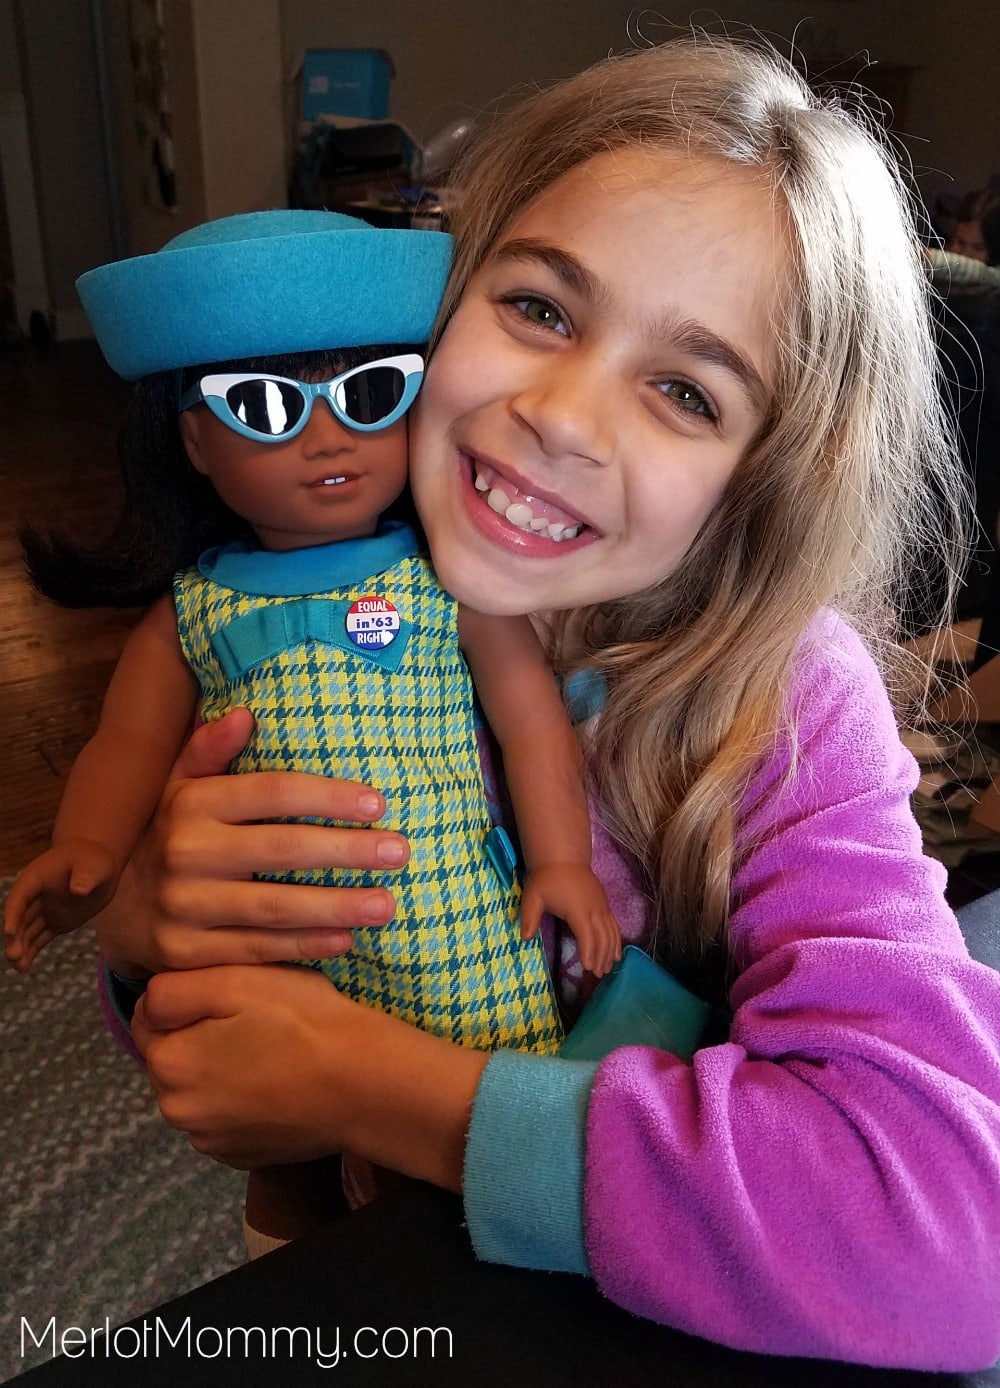 American Girl's Newest BeForever Character Melody is the Perfect Holiday Gift